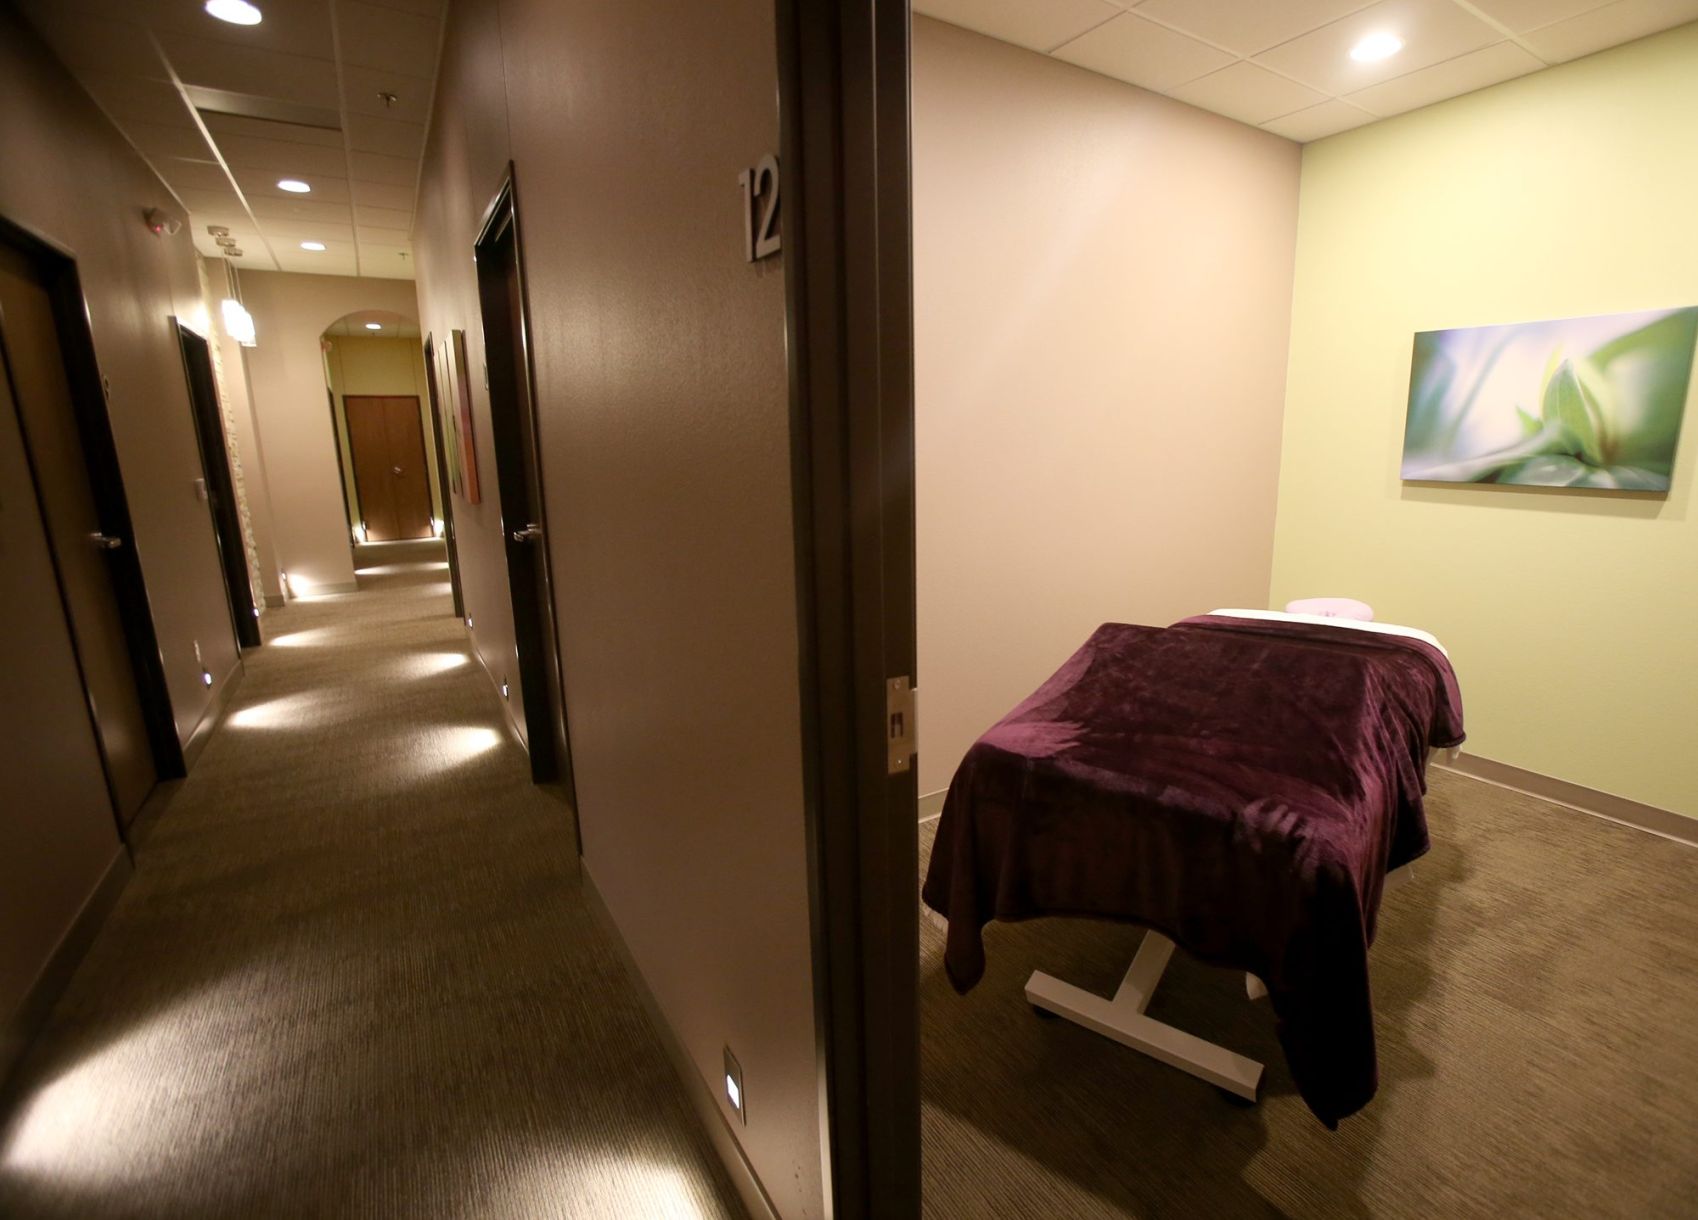 Massage Envy opens in Central Texas Marketplace